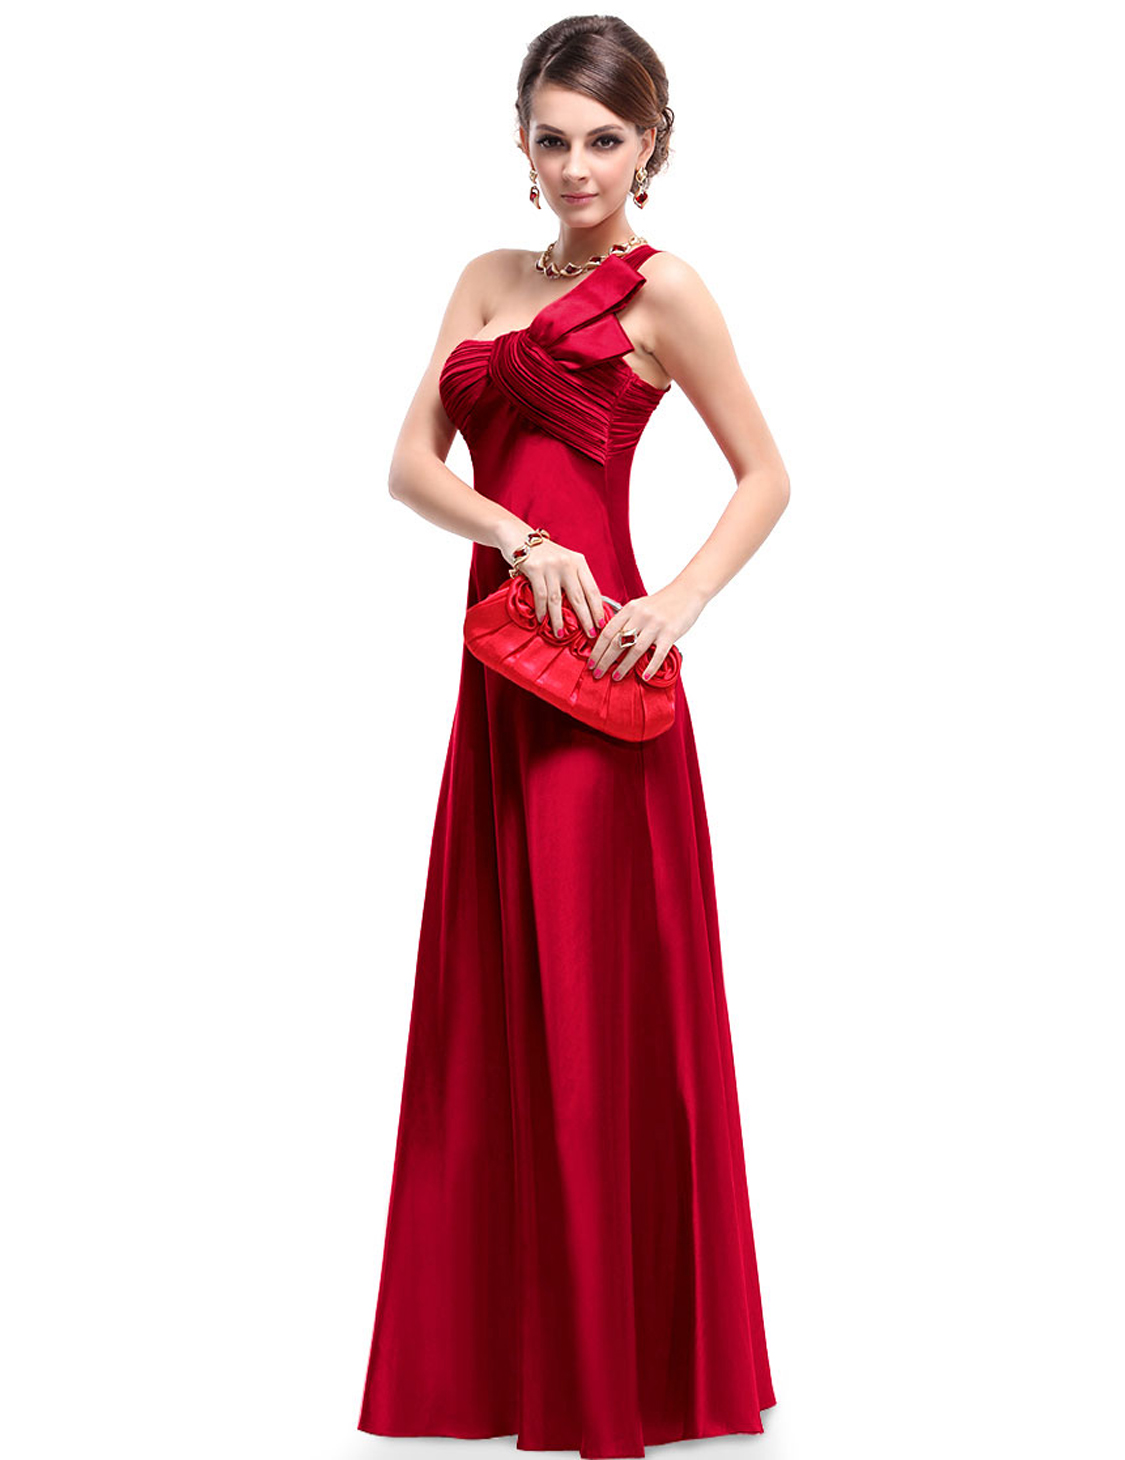 One Shoulder Ruching Padded Open Back Red Satin Wedding Dress 09667RD 